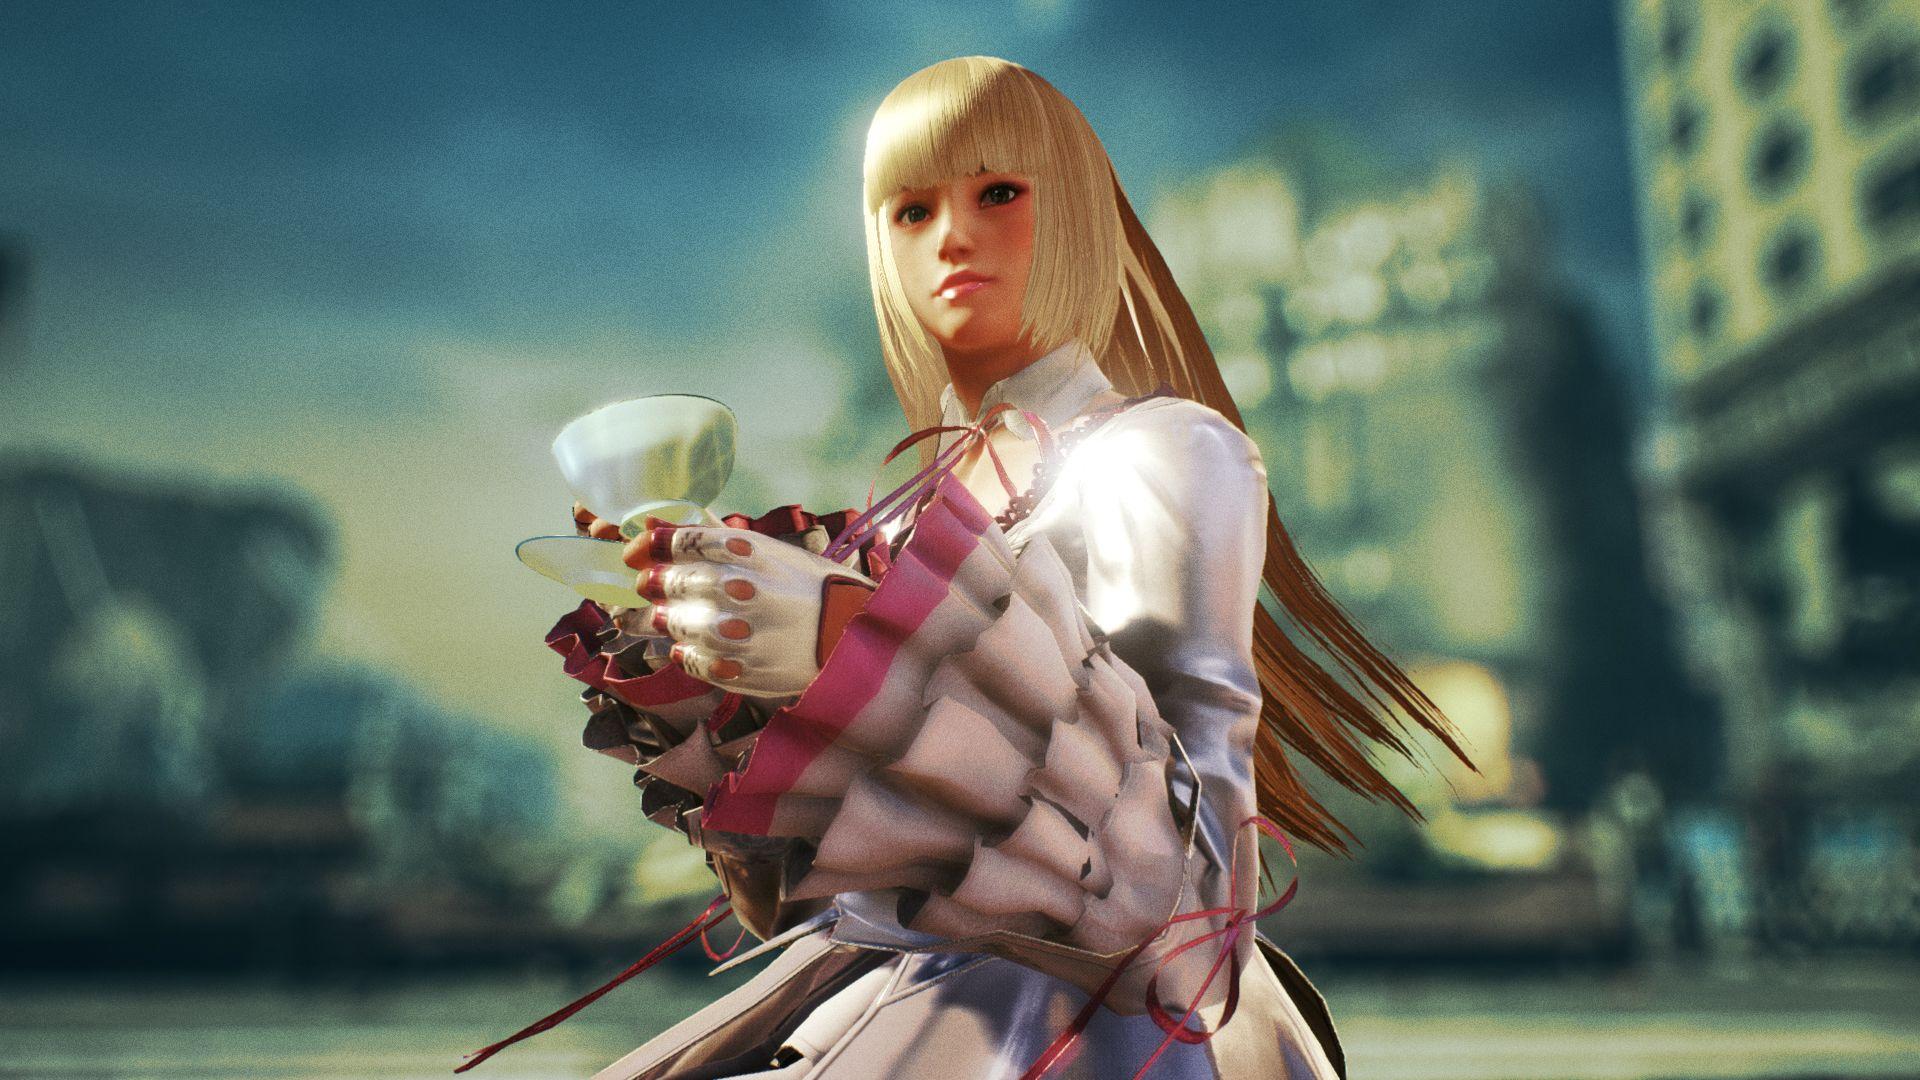 Complete Batch of Tekken 7 Fated Retribution Image in High Quality